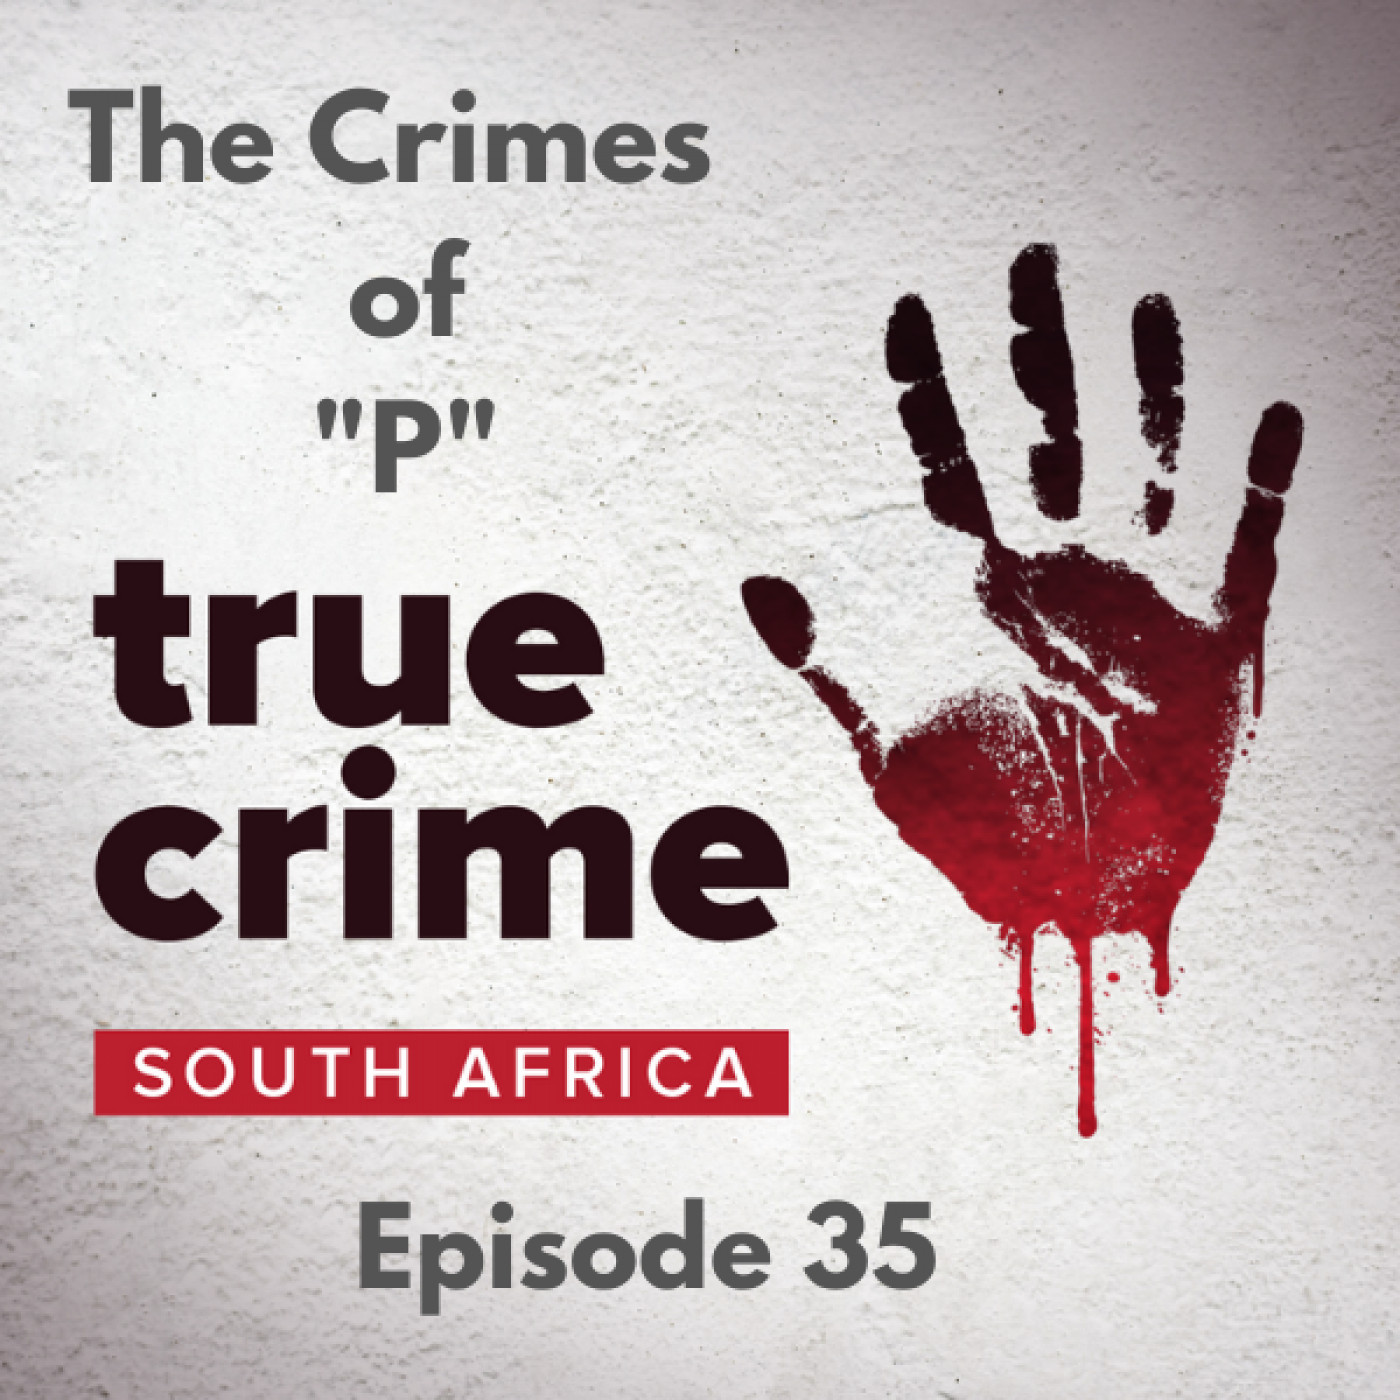 Episode 35 - The Crimes of ”P”